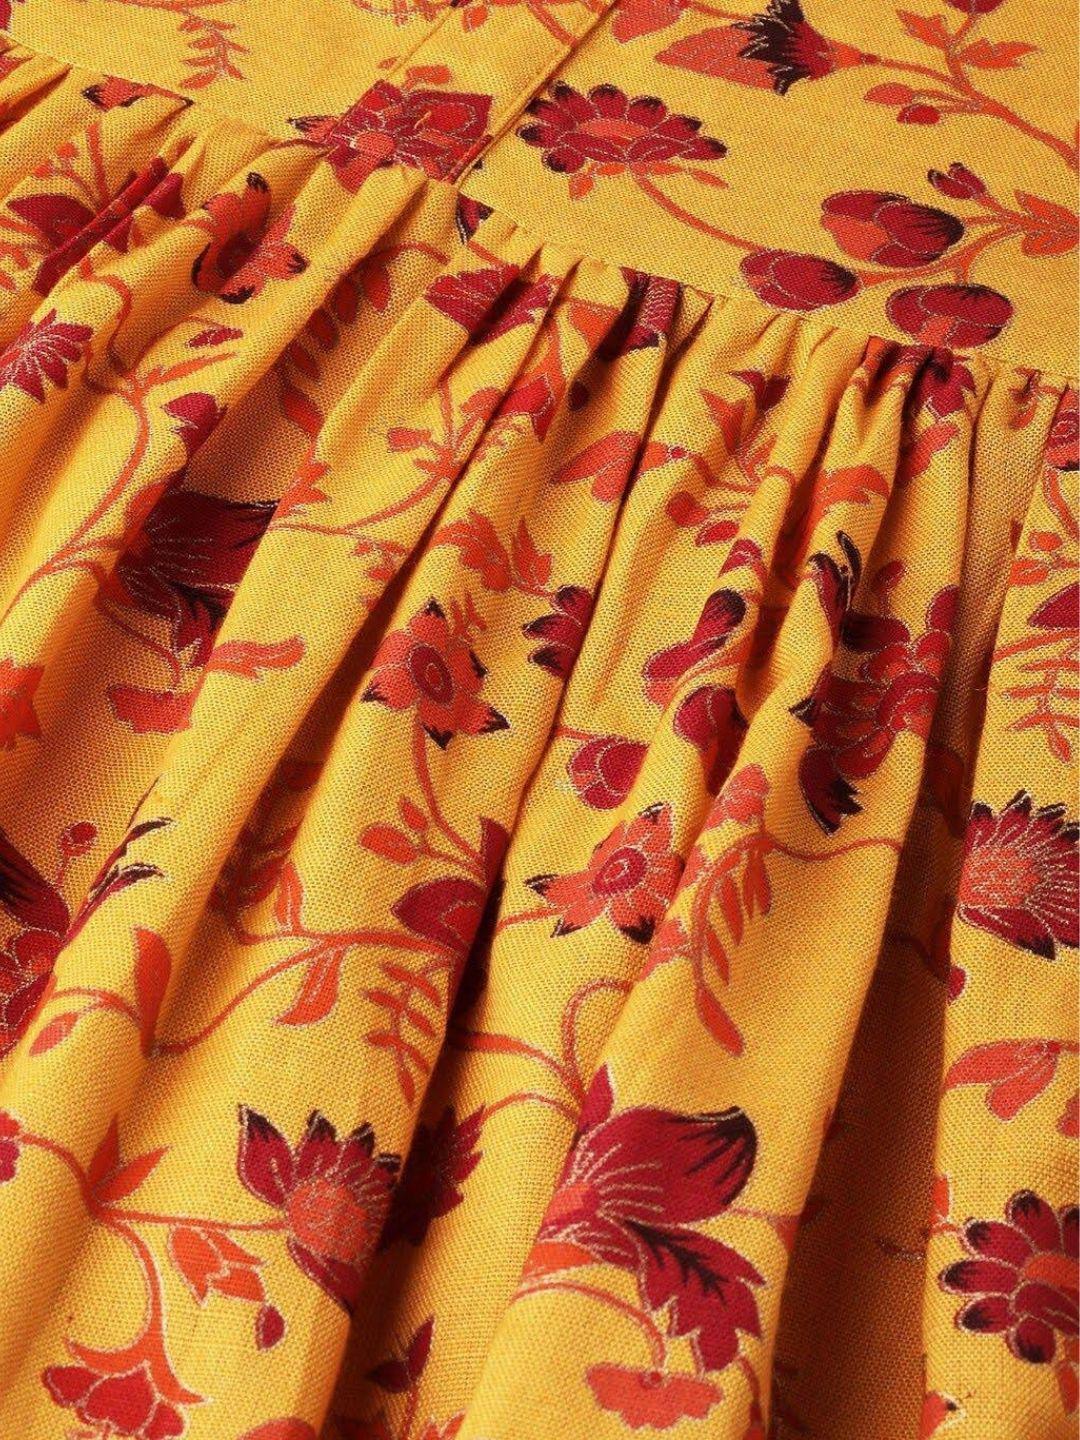 mustard-yellow-red-printed-a-line-dress-10204108YL, Women Clothing, Cotton Dress